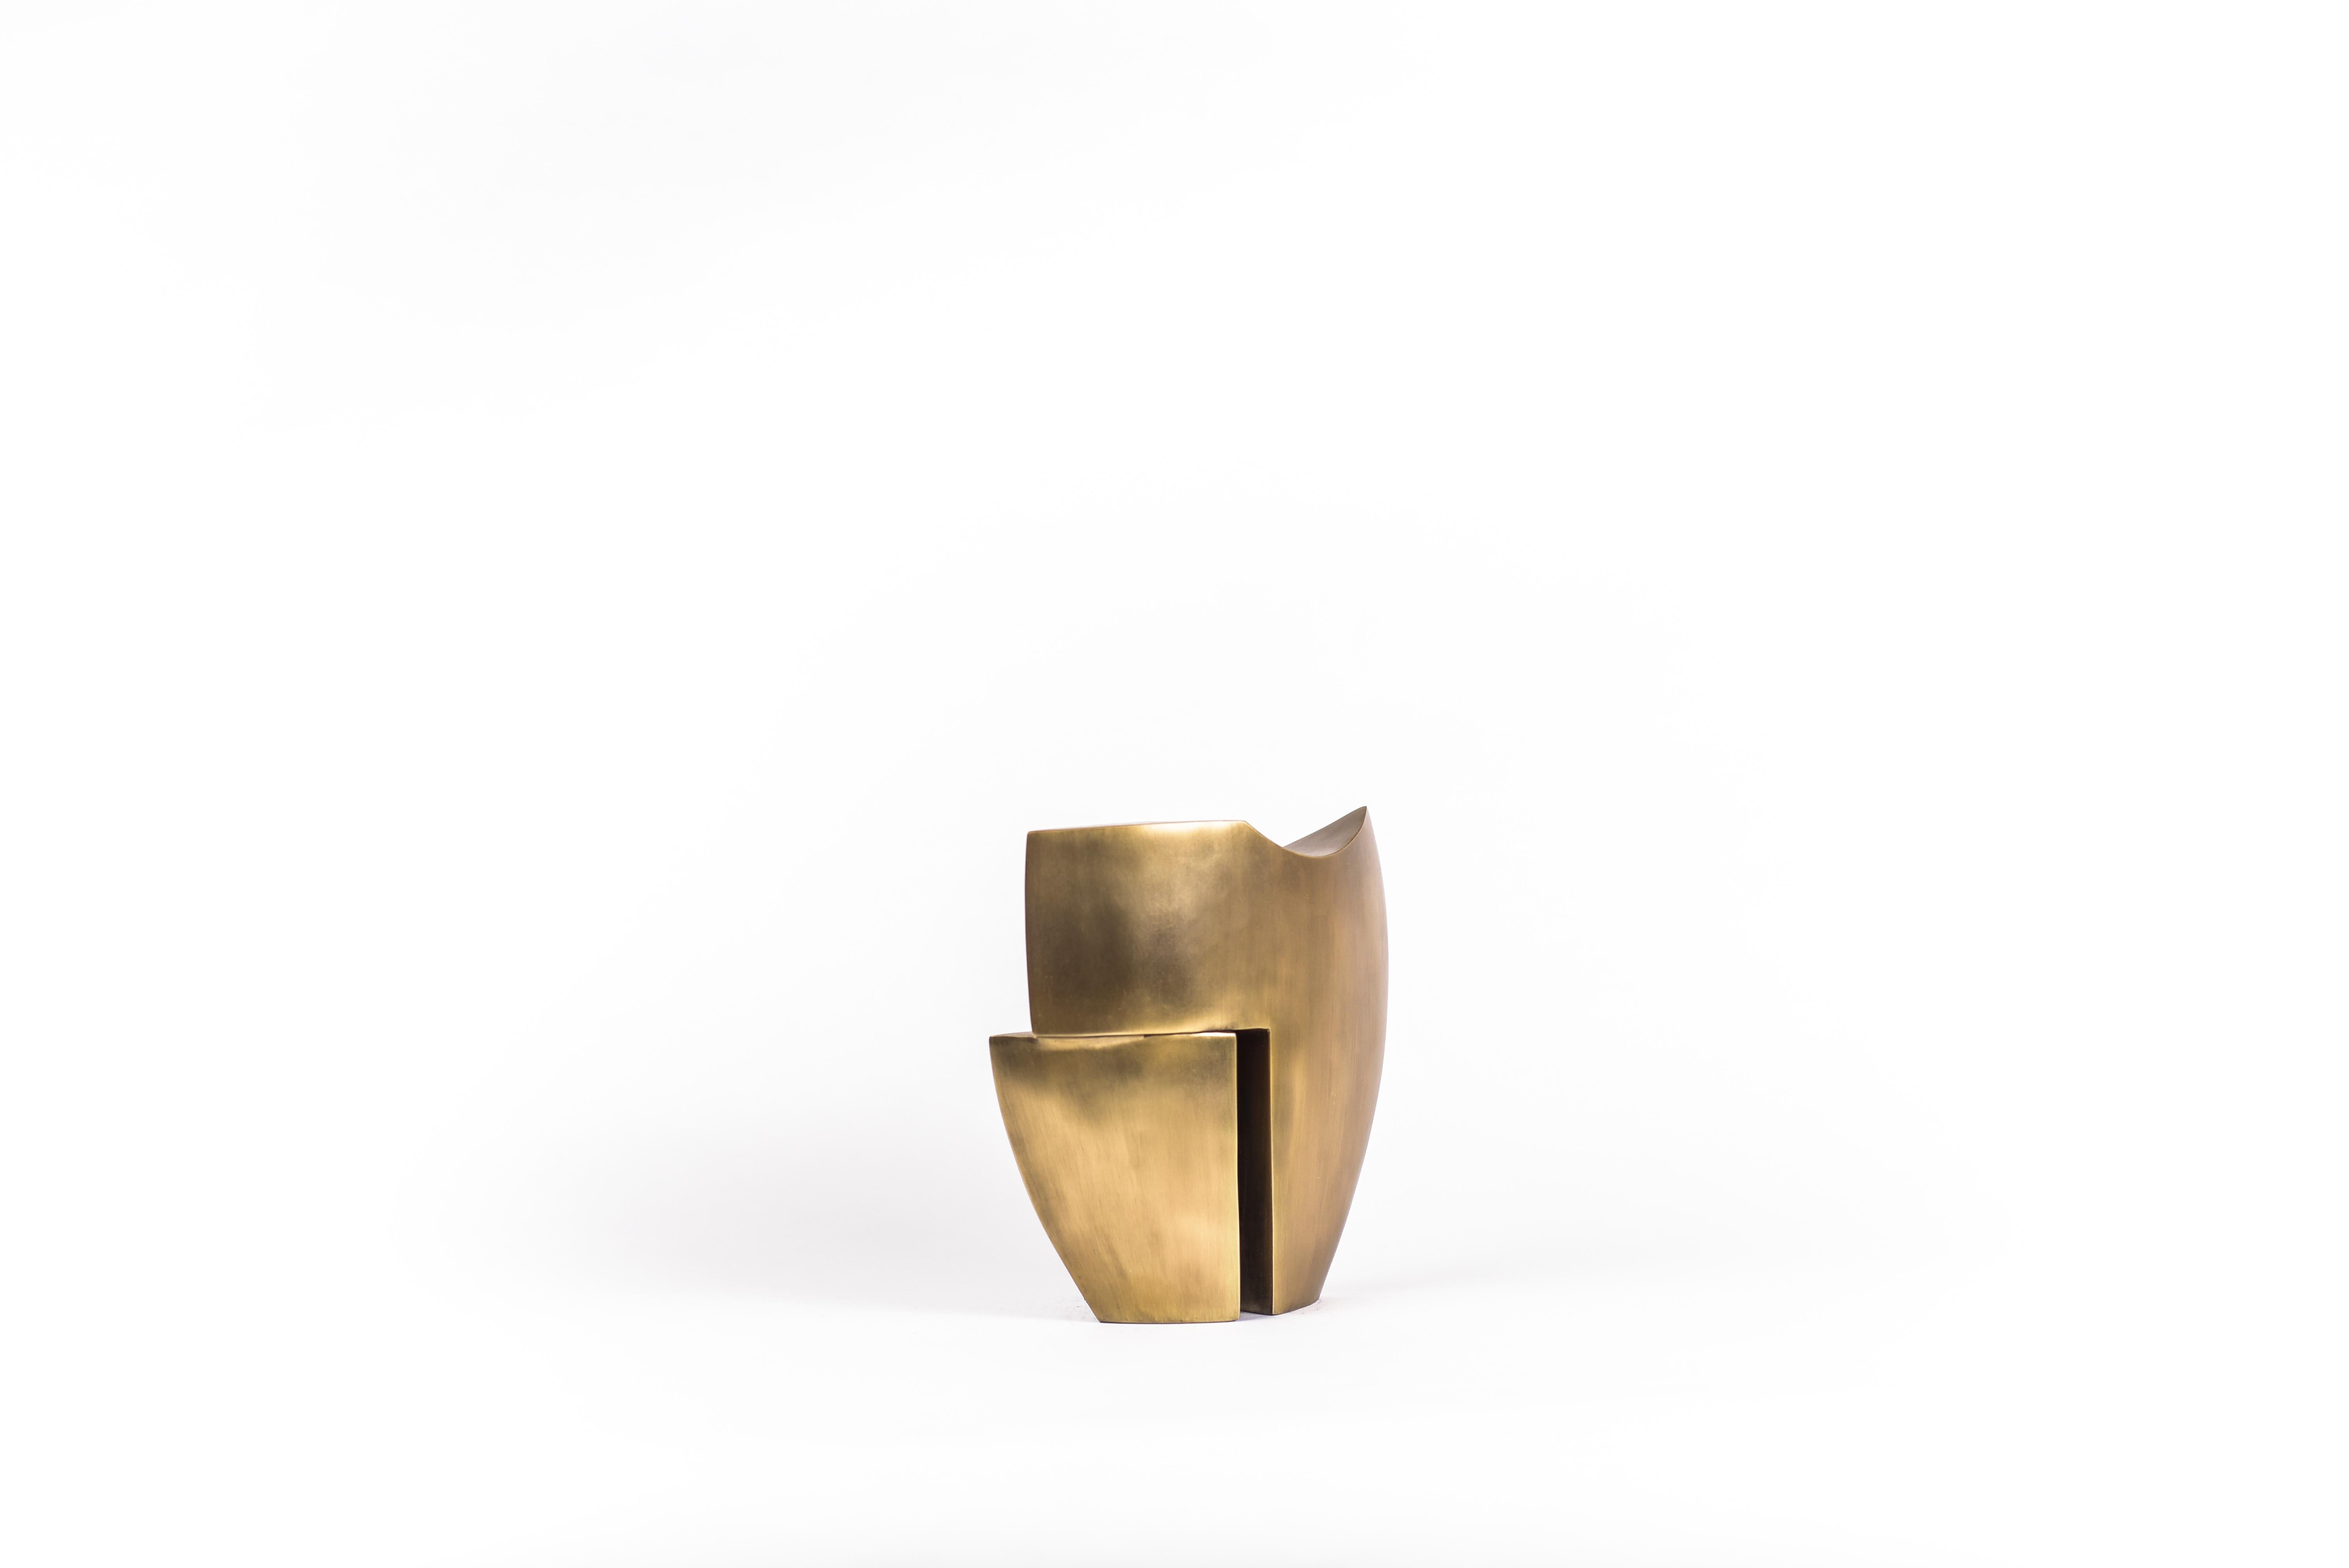 Patrick Coard Paris launches a unique and beautiful sculptural object collection. The bird’s-eye is geometric and sleek with it's delicate but defined details. The piece is entirely handcrafted in bronze-patina brass.

The dimensions of this piece